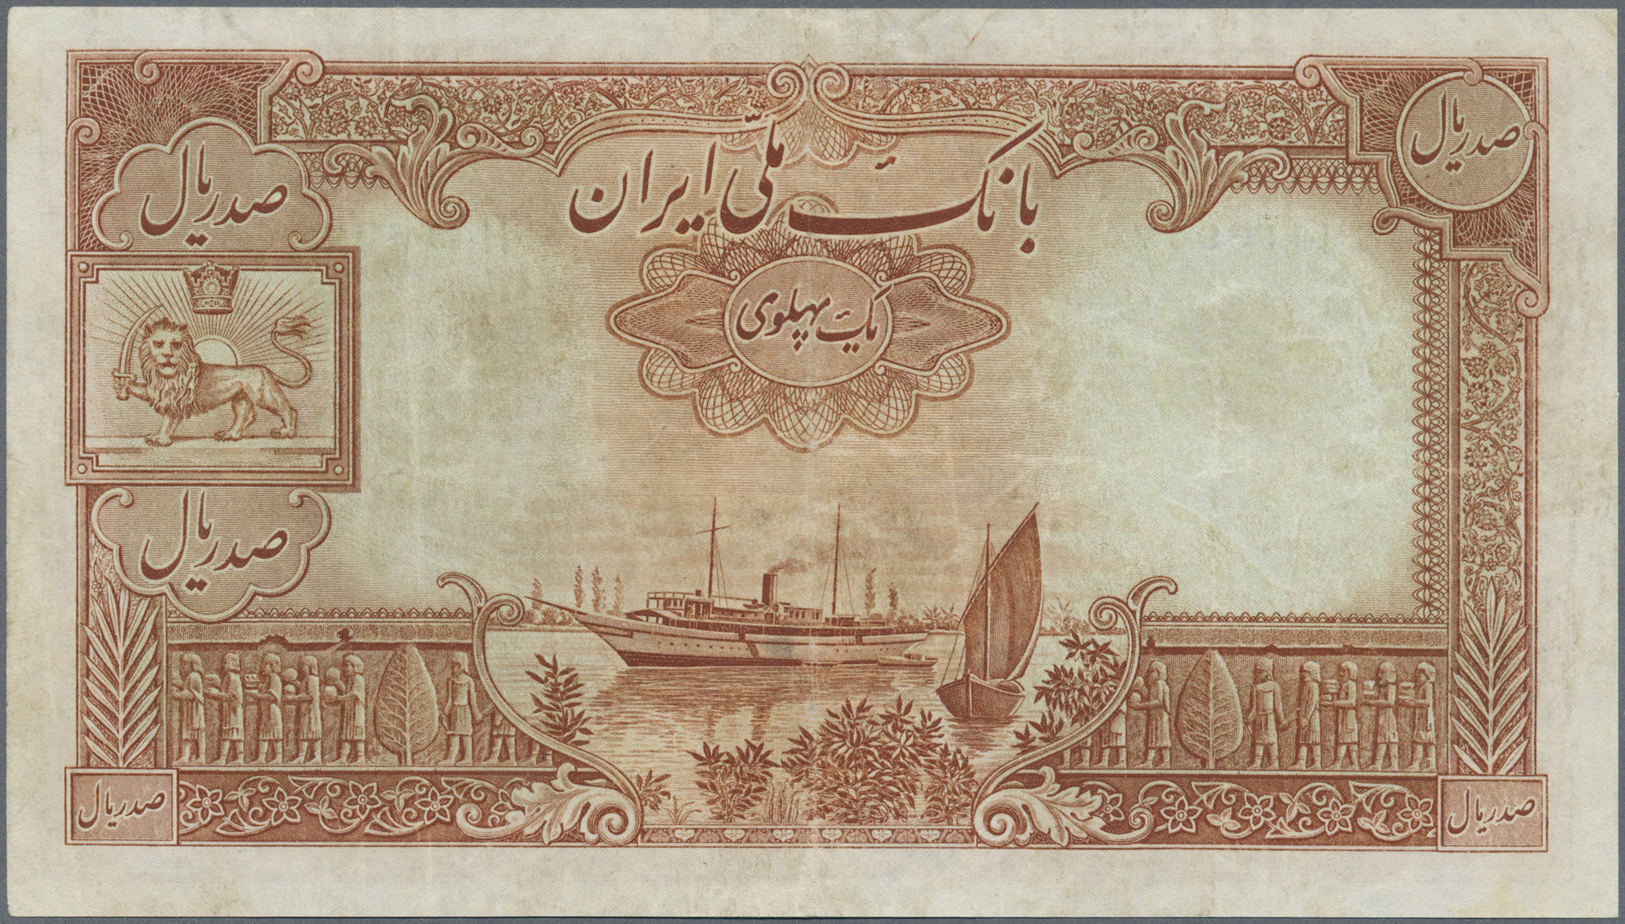 01213 Iran: 100 Rials ND P. 36A, Pressed, No Holes Or Tears, Folds Visible But Pressed, Still Nice Colors, Condition: F. - Iran